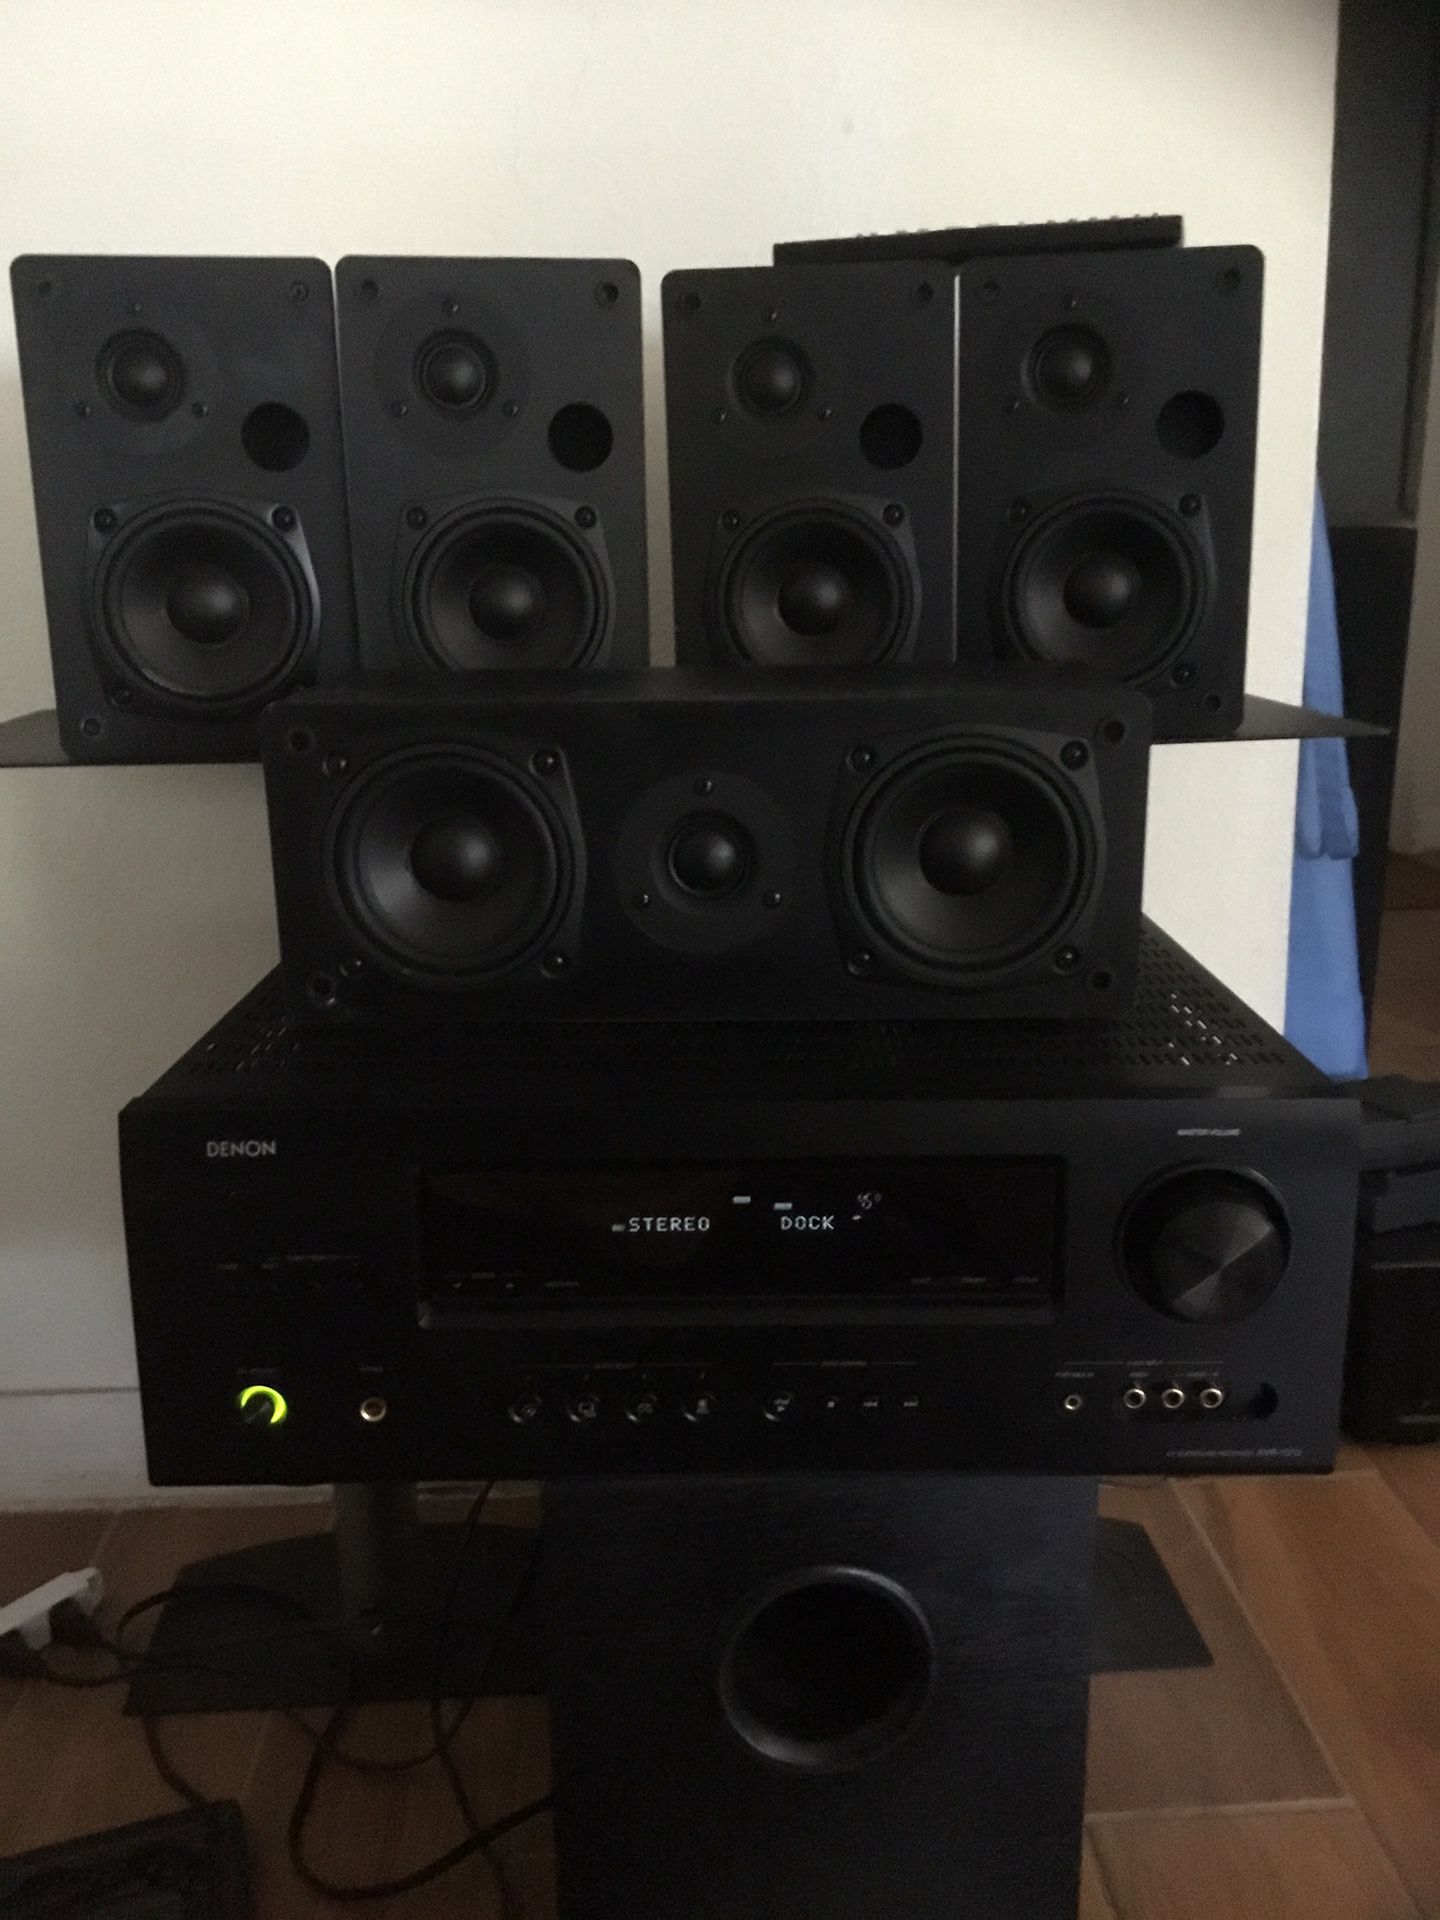 Denon surround system stereo with bluetooth